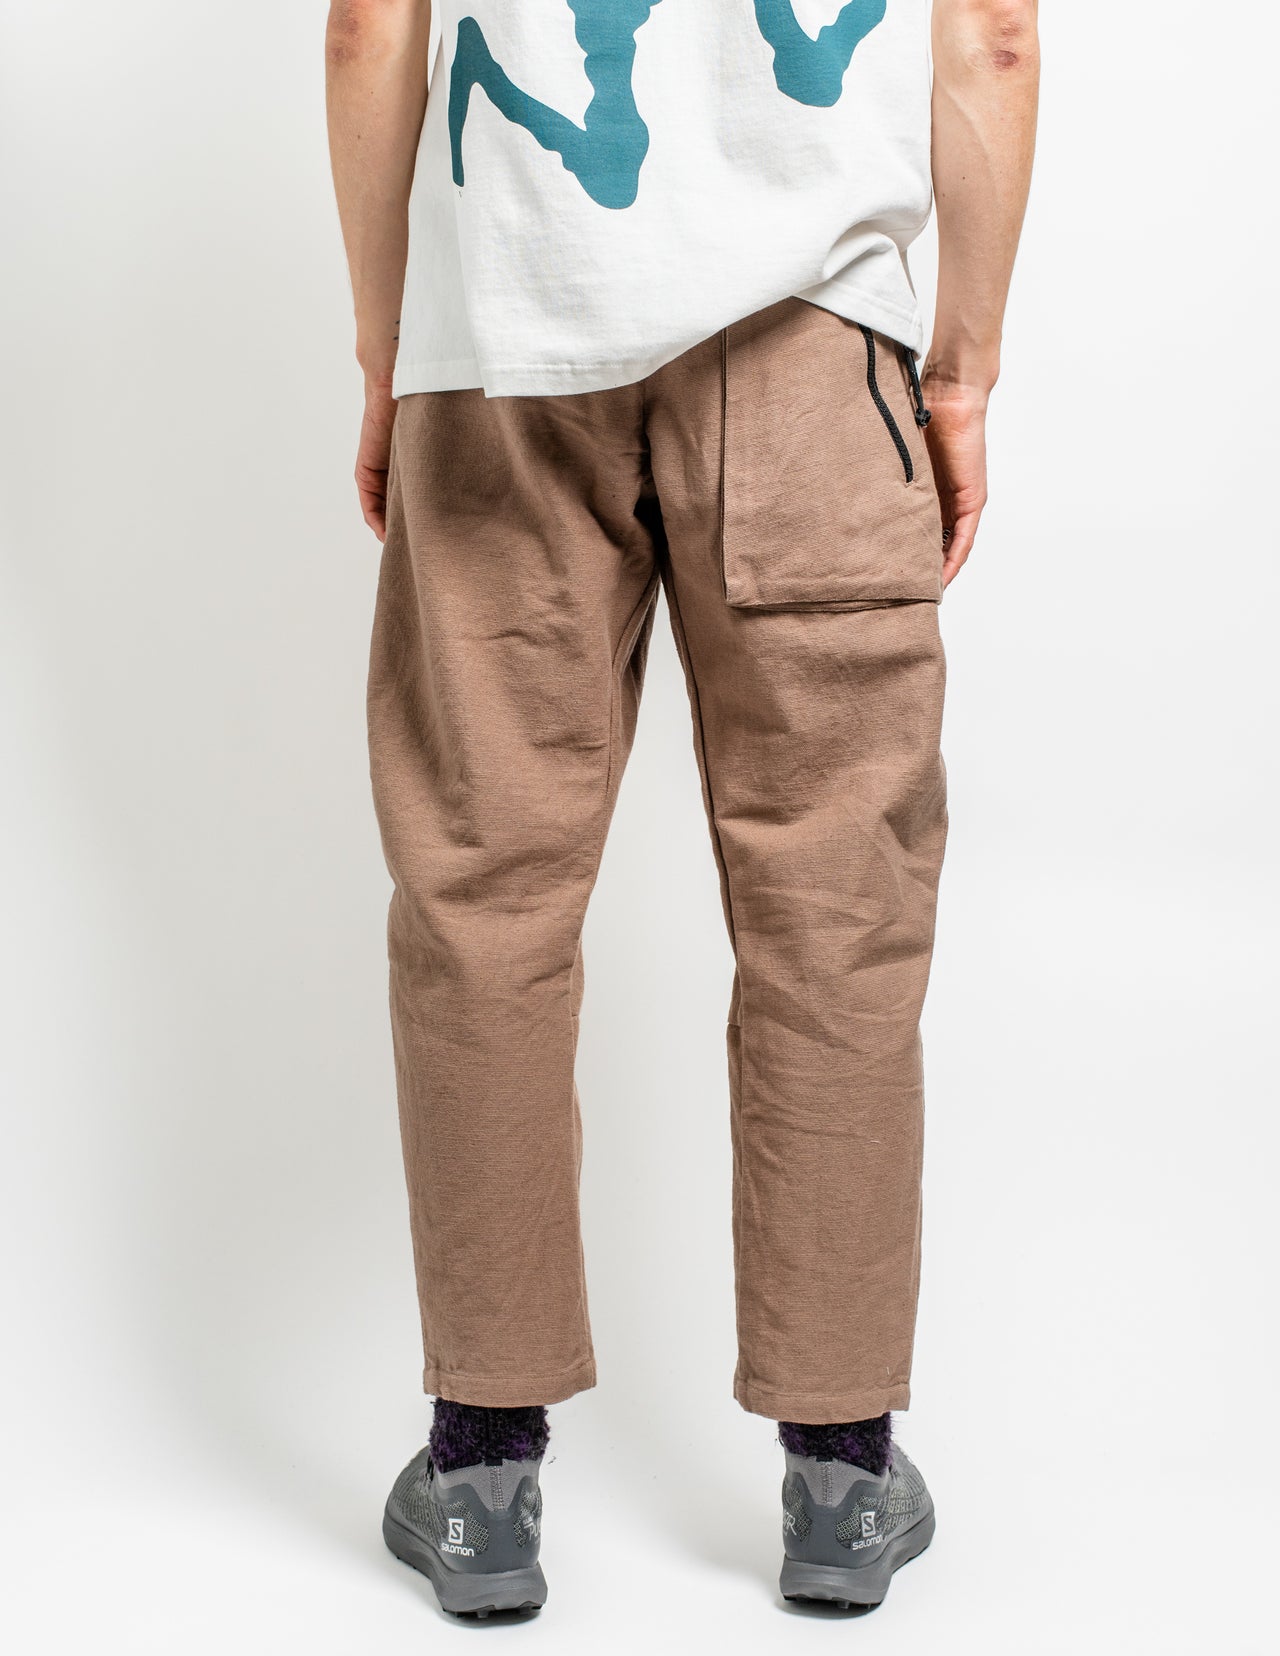 MP-102 Trail Pant in Muted Khaki